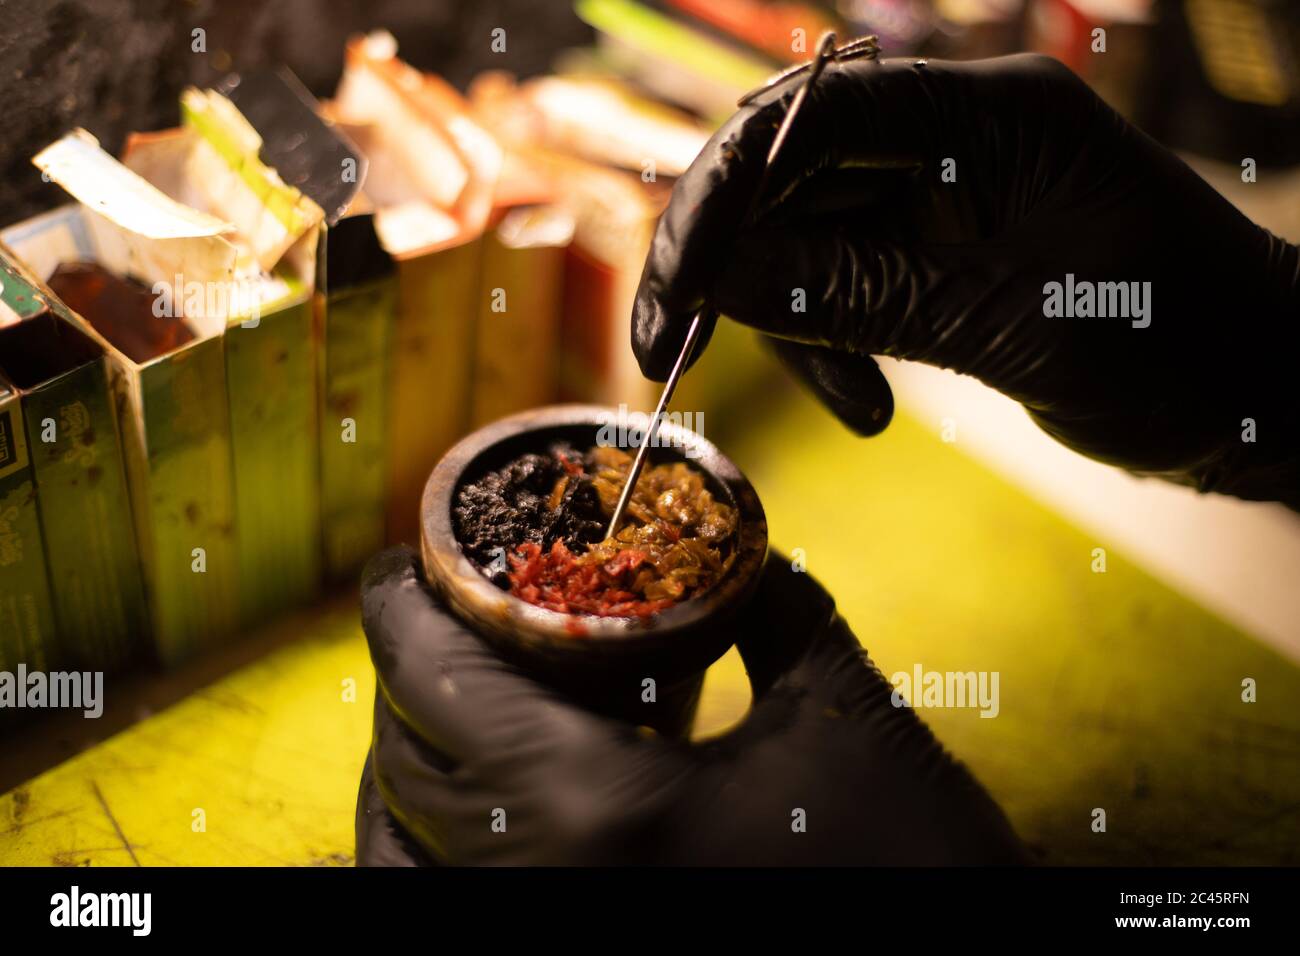 Preparation of Hookah bowl with tabacco leaf hands Stock Photo